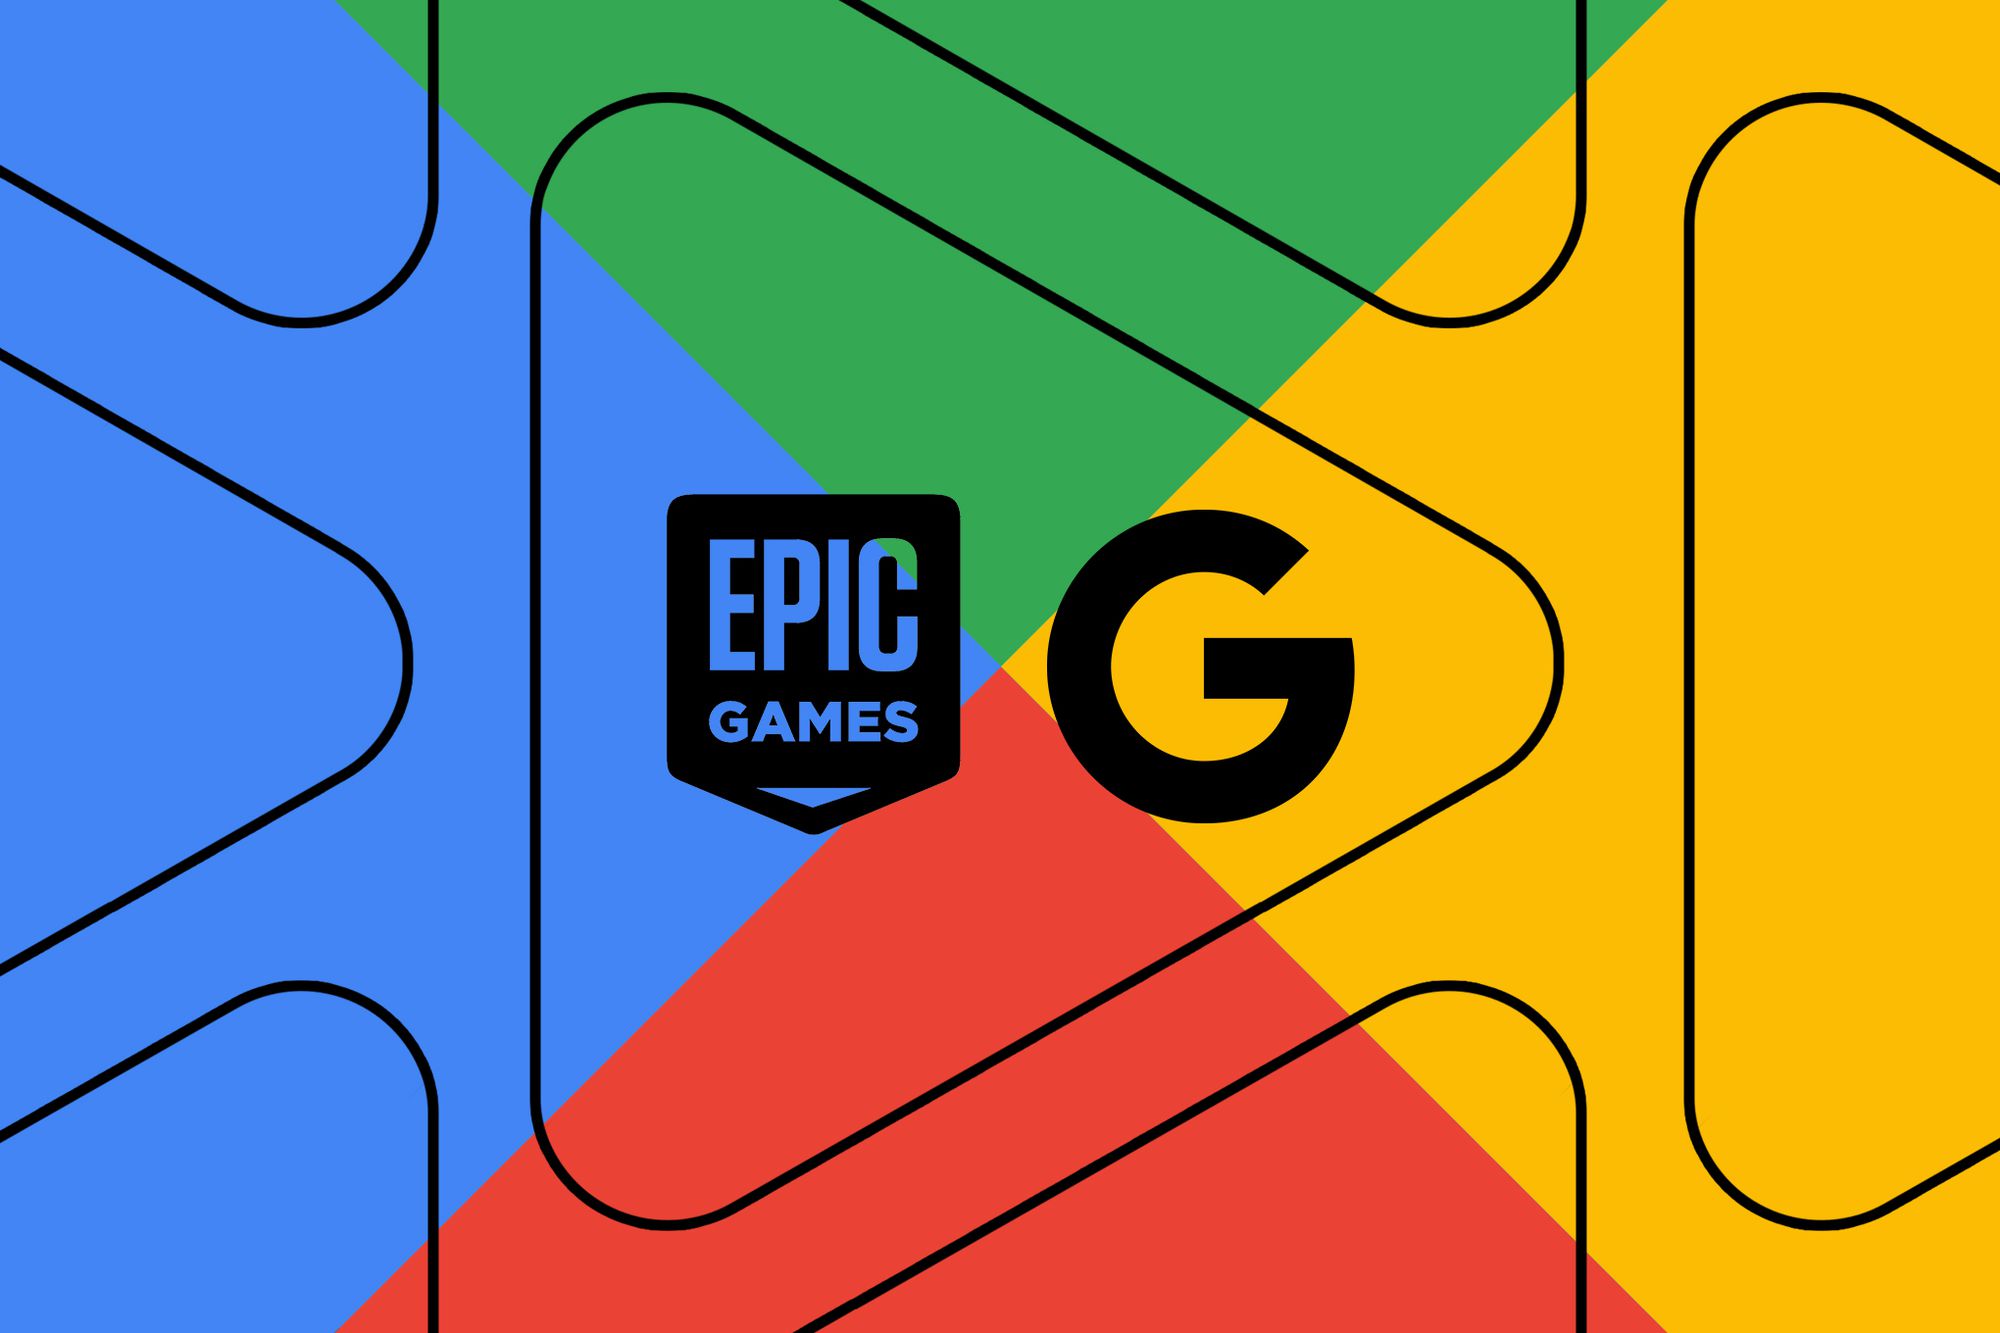 The case between Epic Games and Google has been resolved